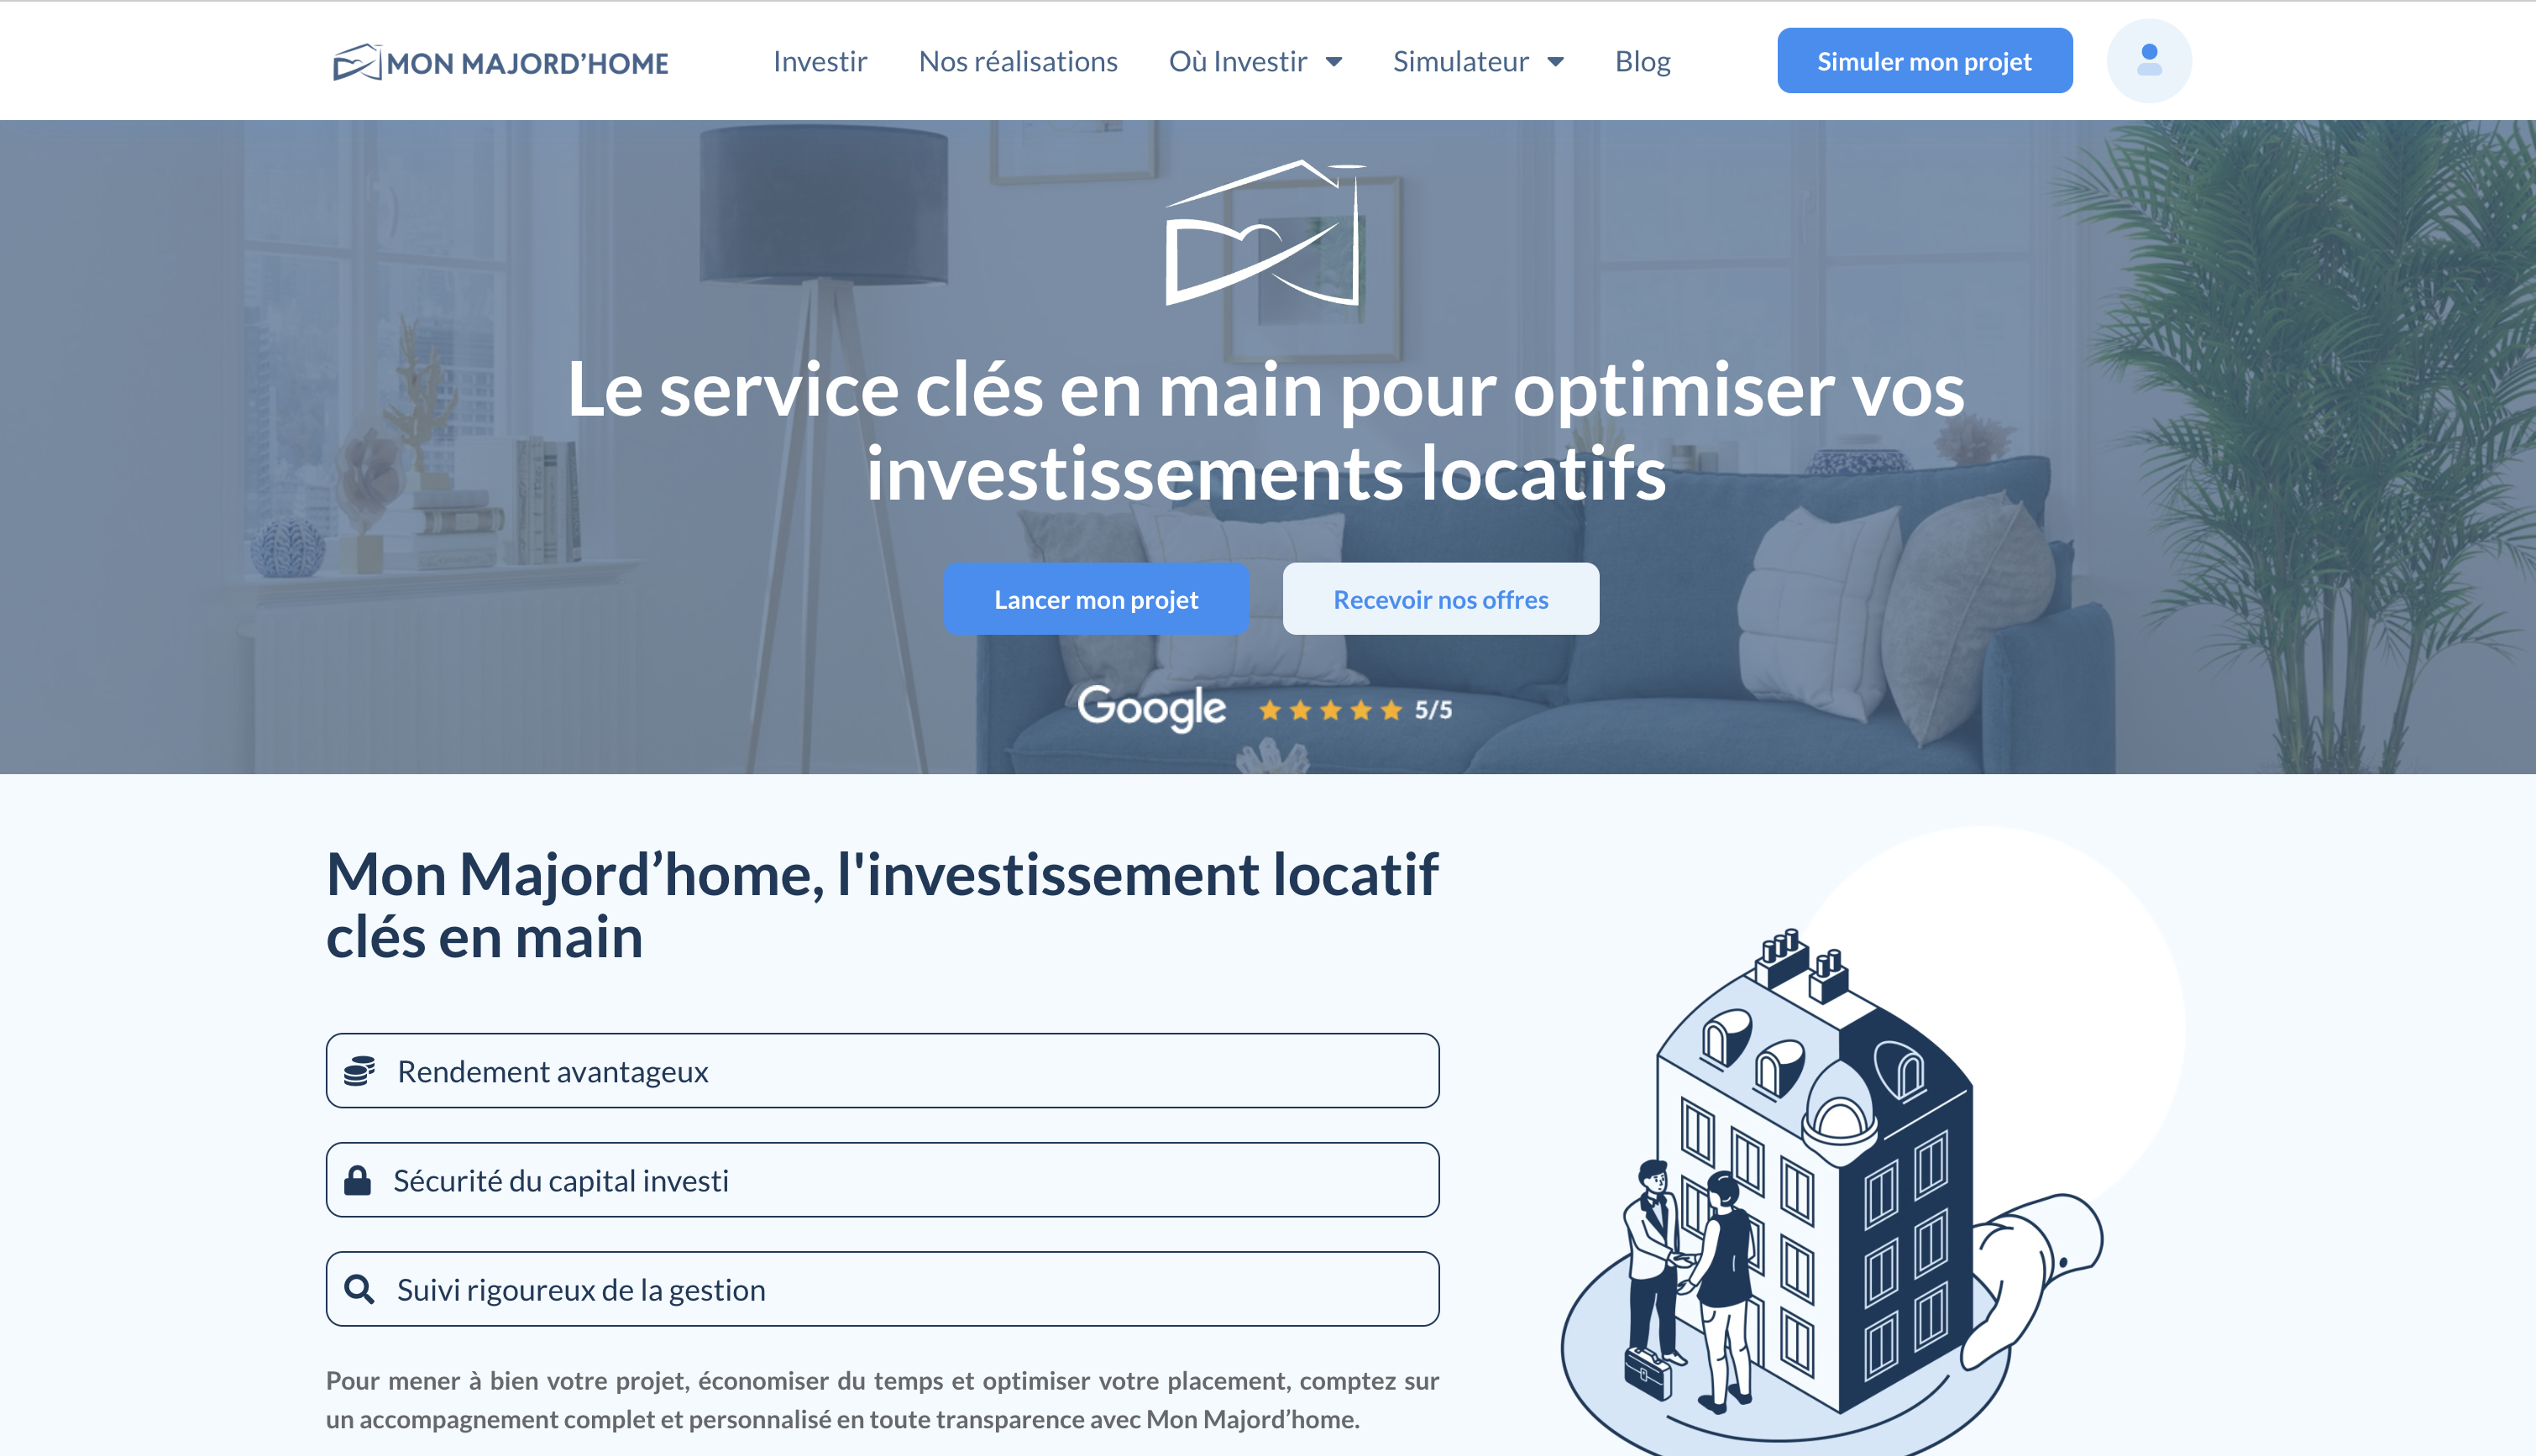 <img alt="" src="/user/pages/01.use-cases/03.mon-majord-home-use-case-full-website-experimentation/mon-majord-home-experimentation.png?title" width="3020" height="1734" style="--aspect-ratio: 3020/1734;" />